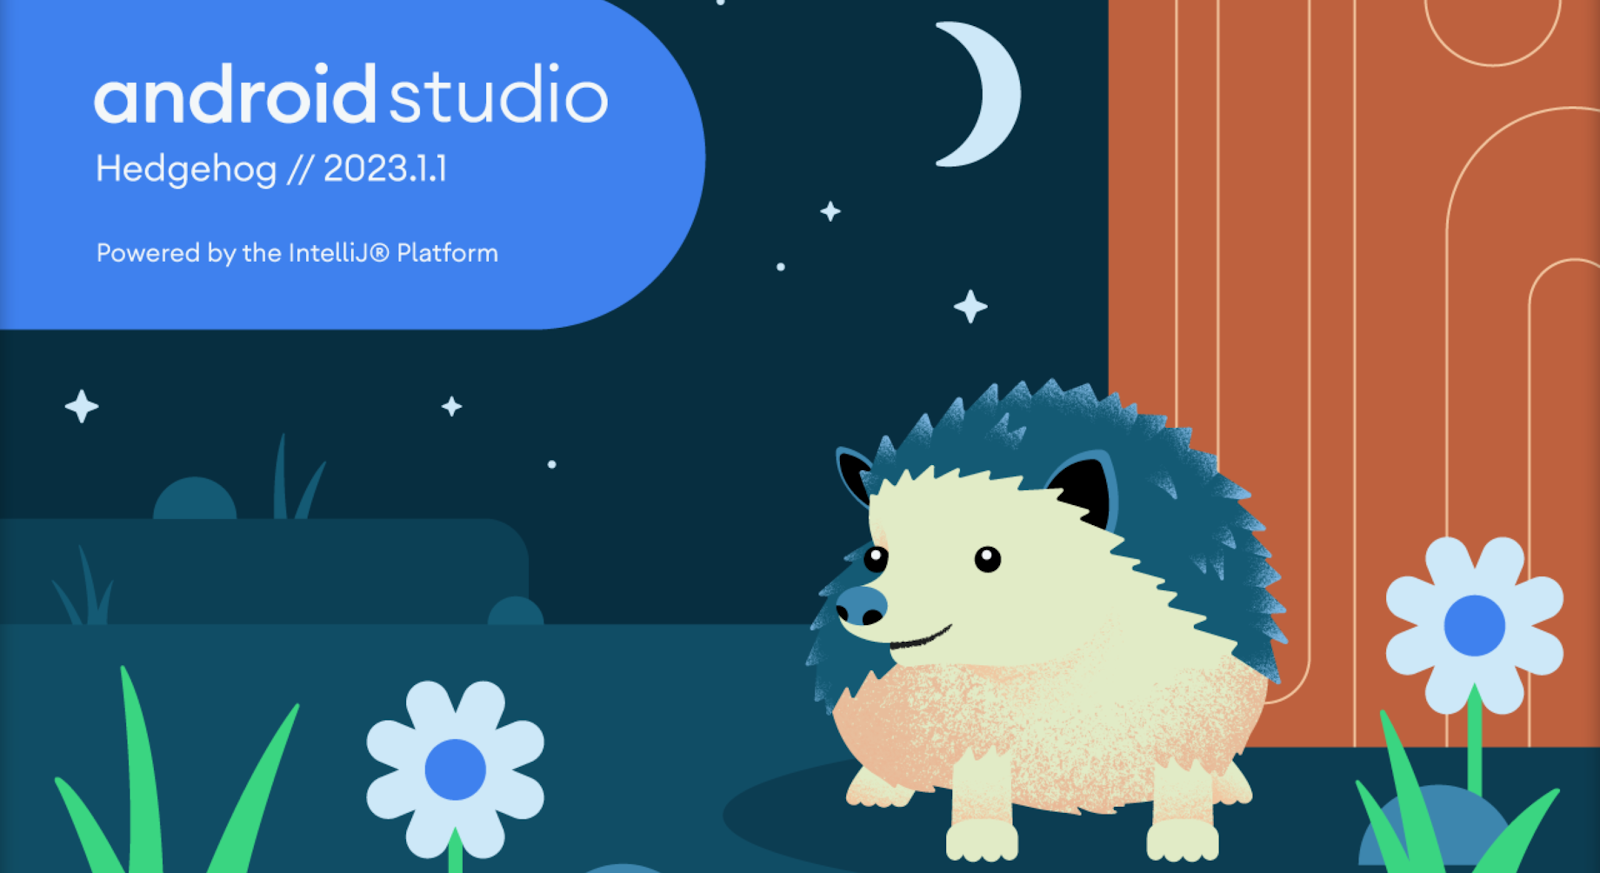 Android Studio Hedgehog is stable